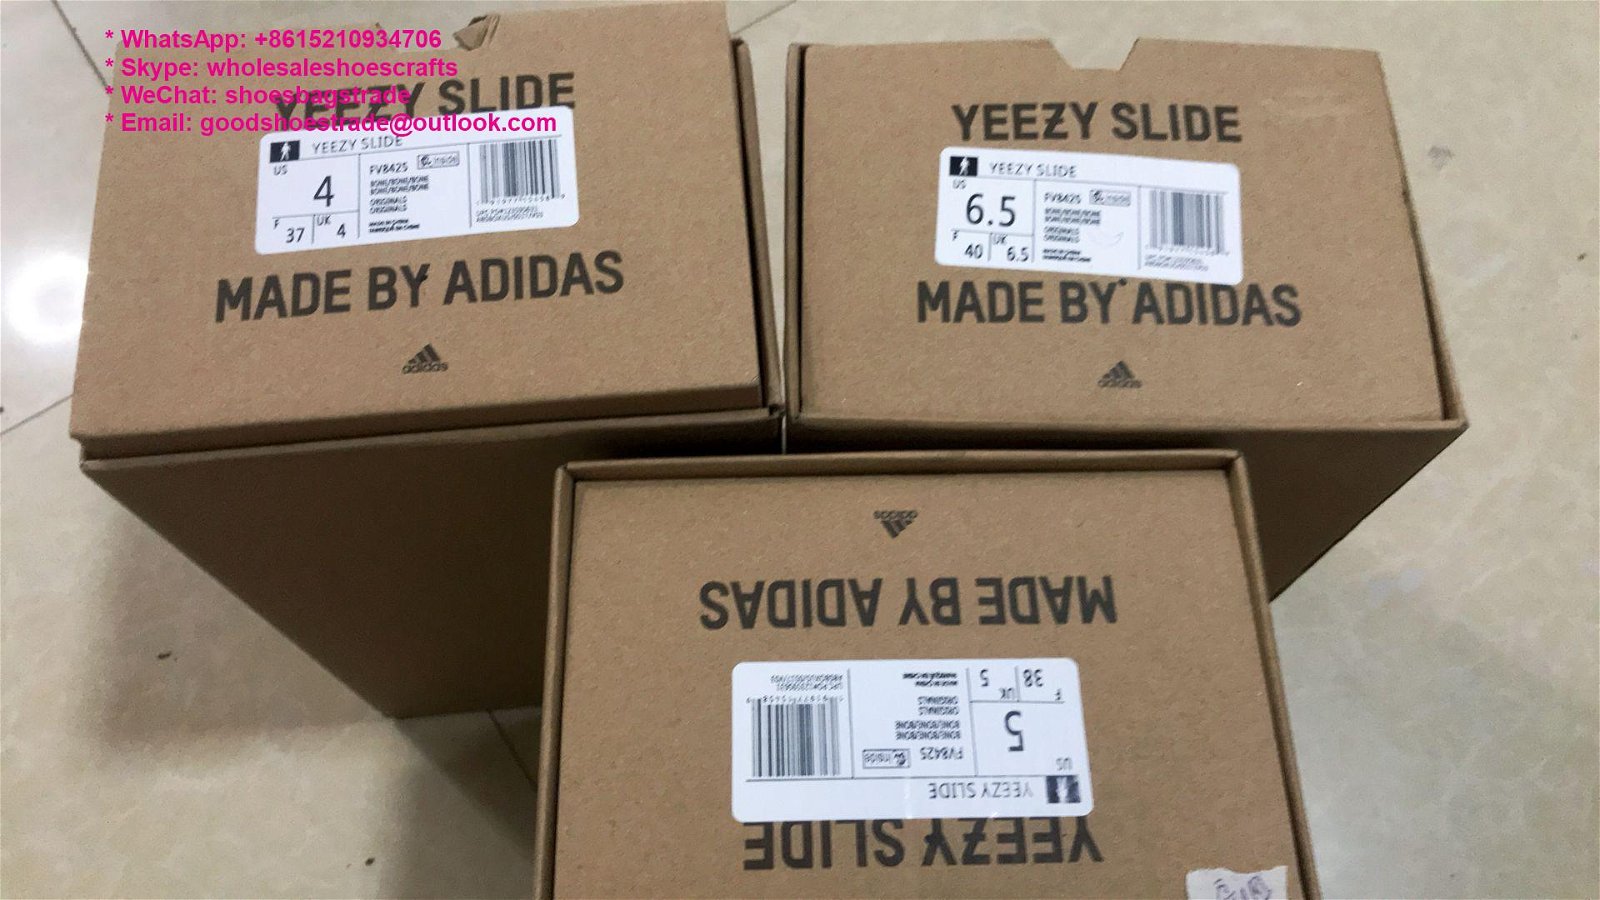 Cheap Adidas Yeezy Boost 350 V2 Carbon